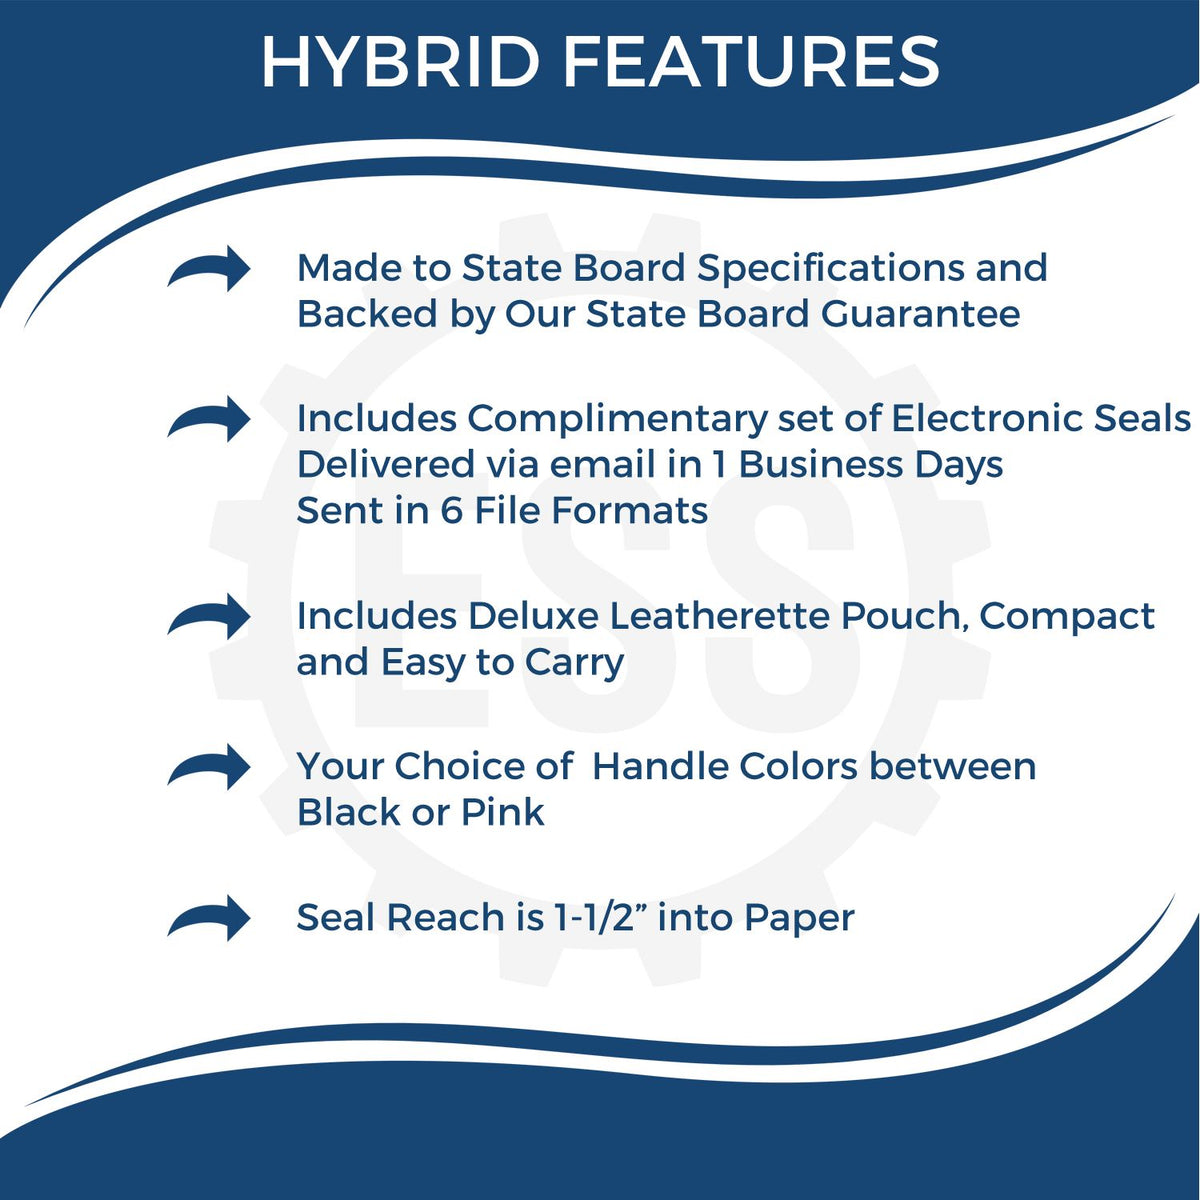 A picture of an infographic highlighting the selling points for the Hybrid Maryland Engineer Seal